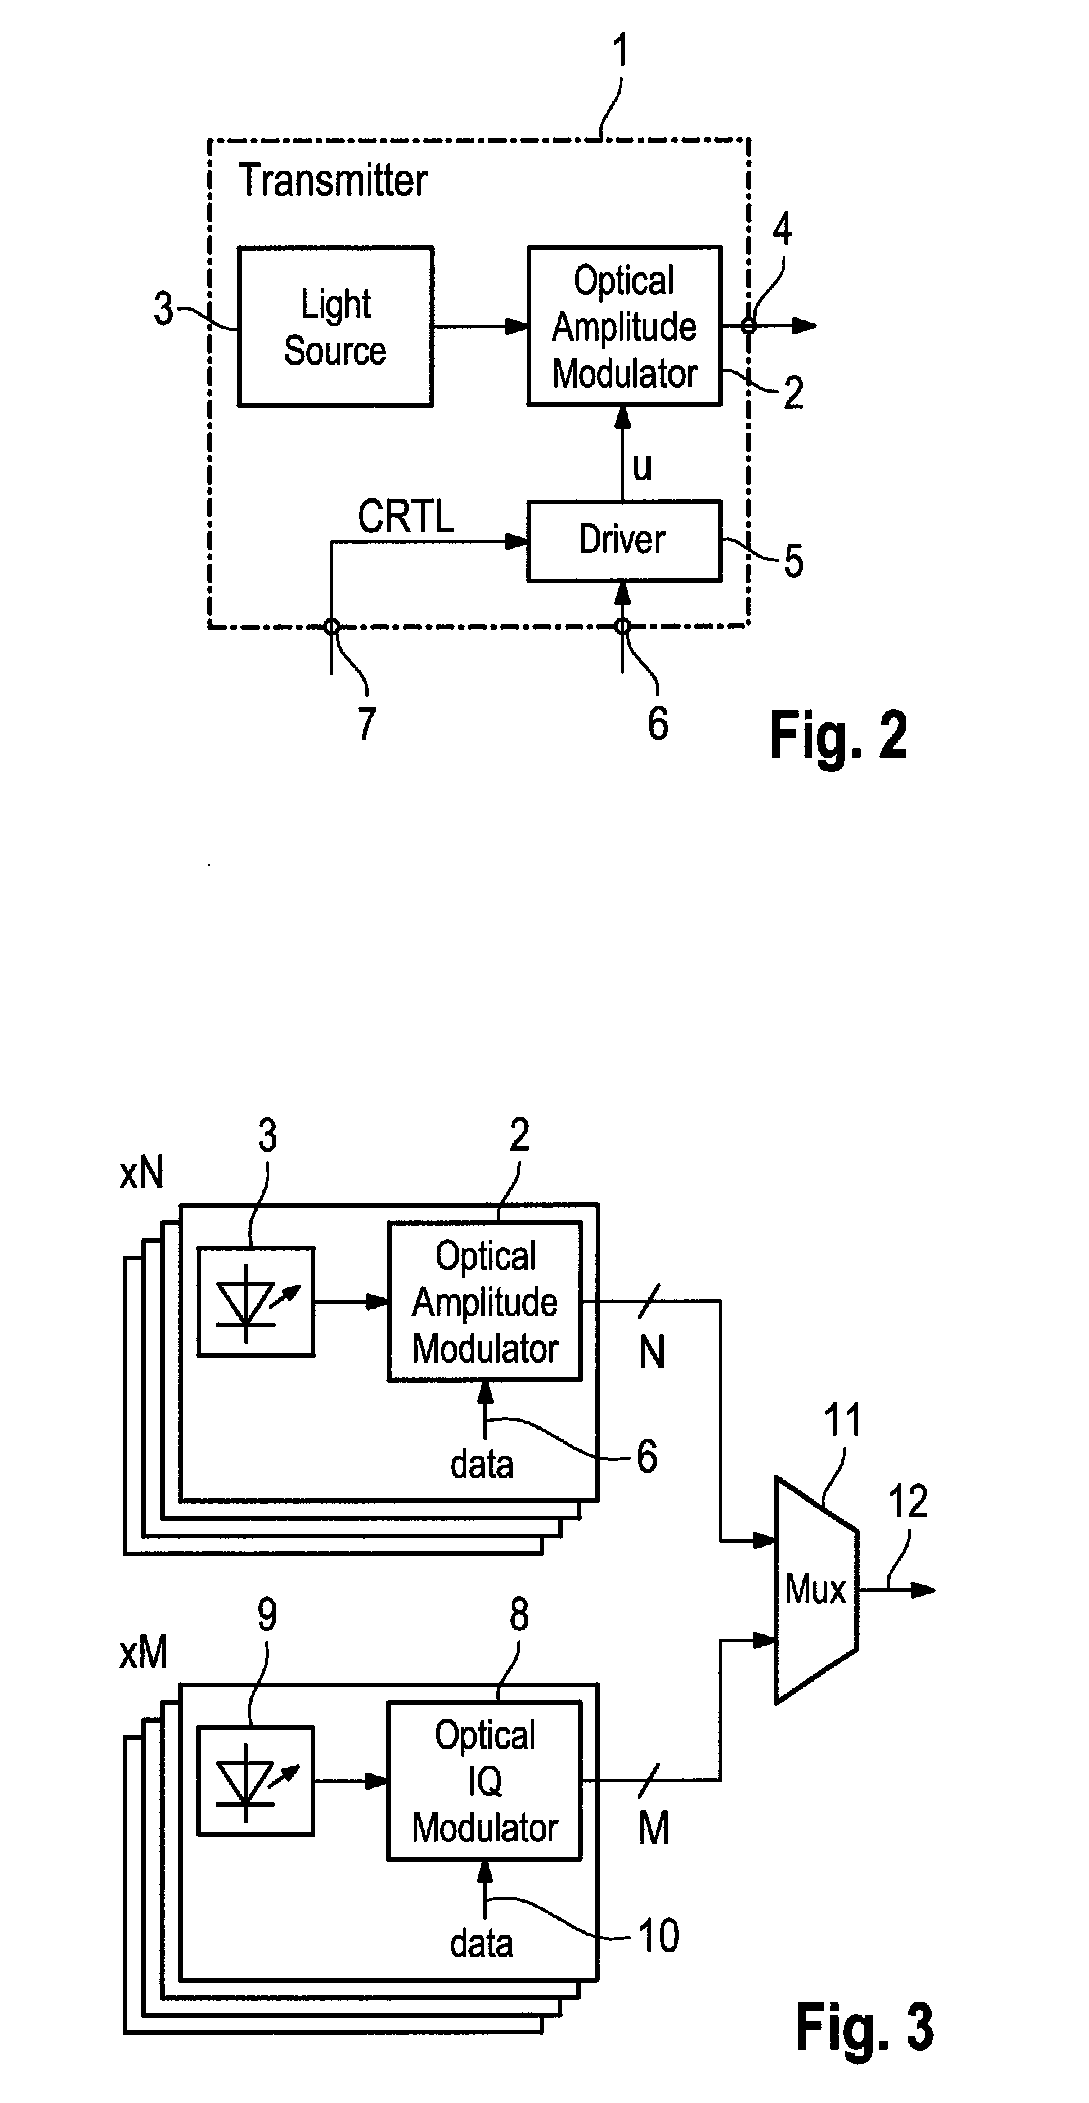 Method and apparatus for increasing a transmission performance of a hybrid wavelength division multiplexing system